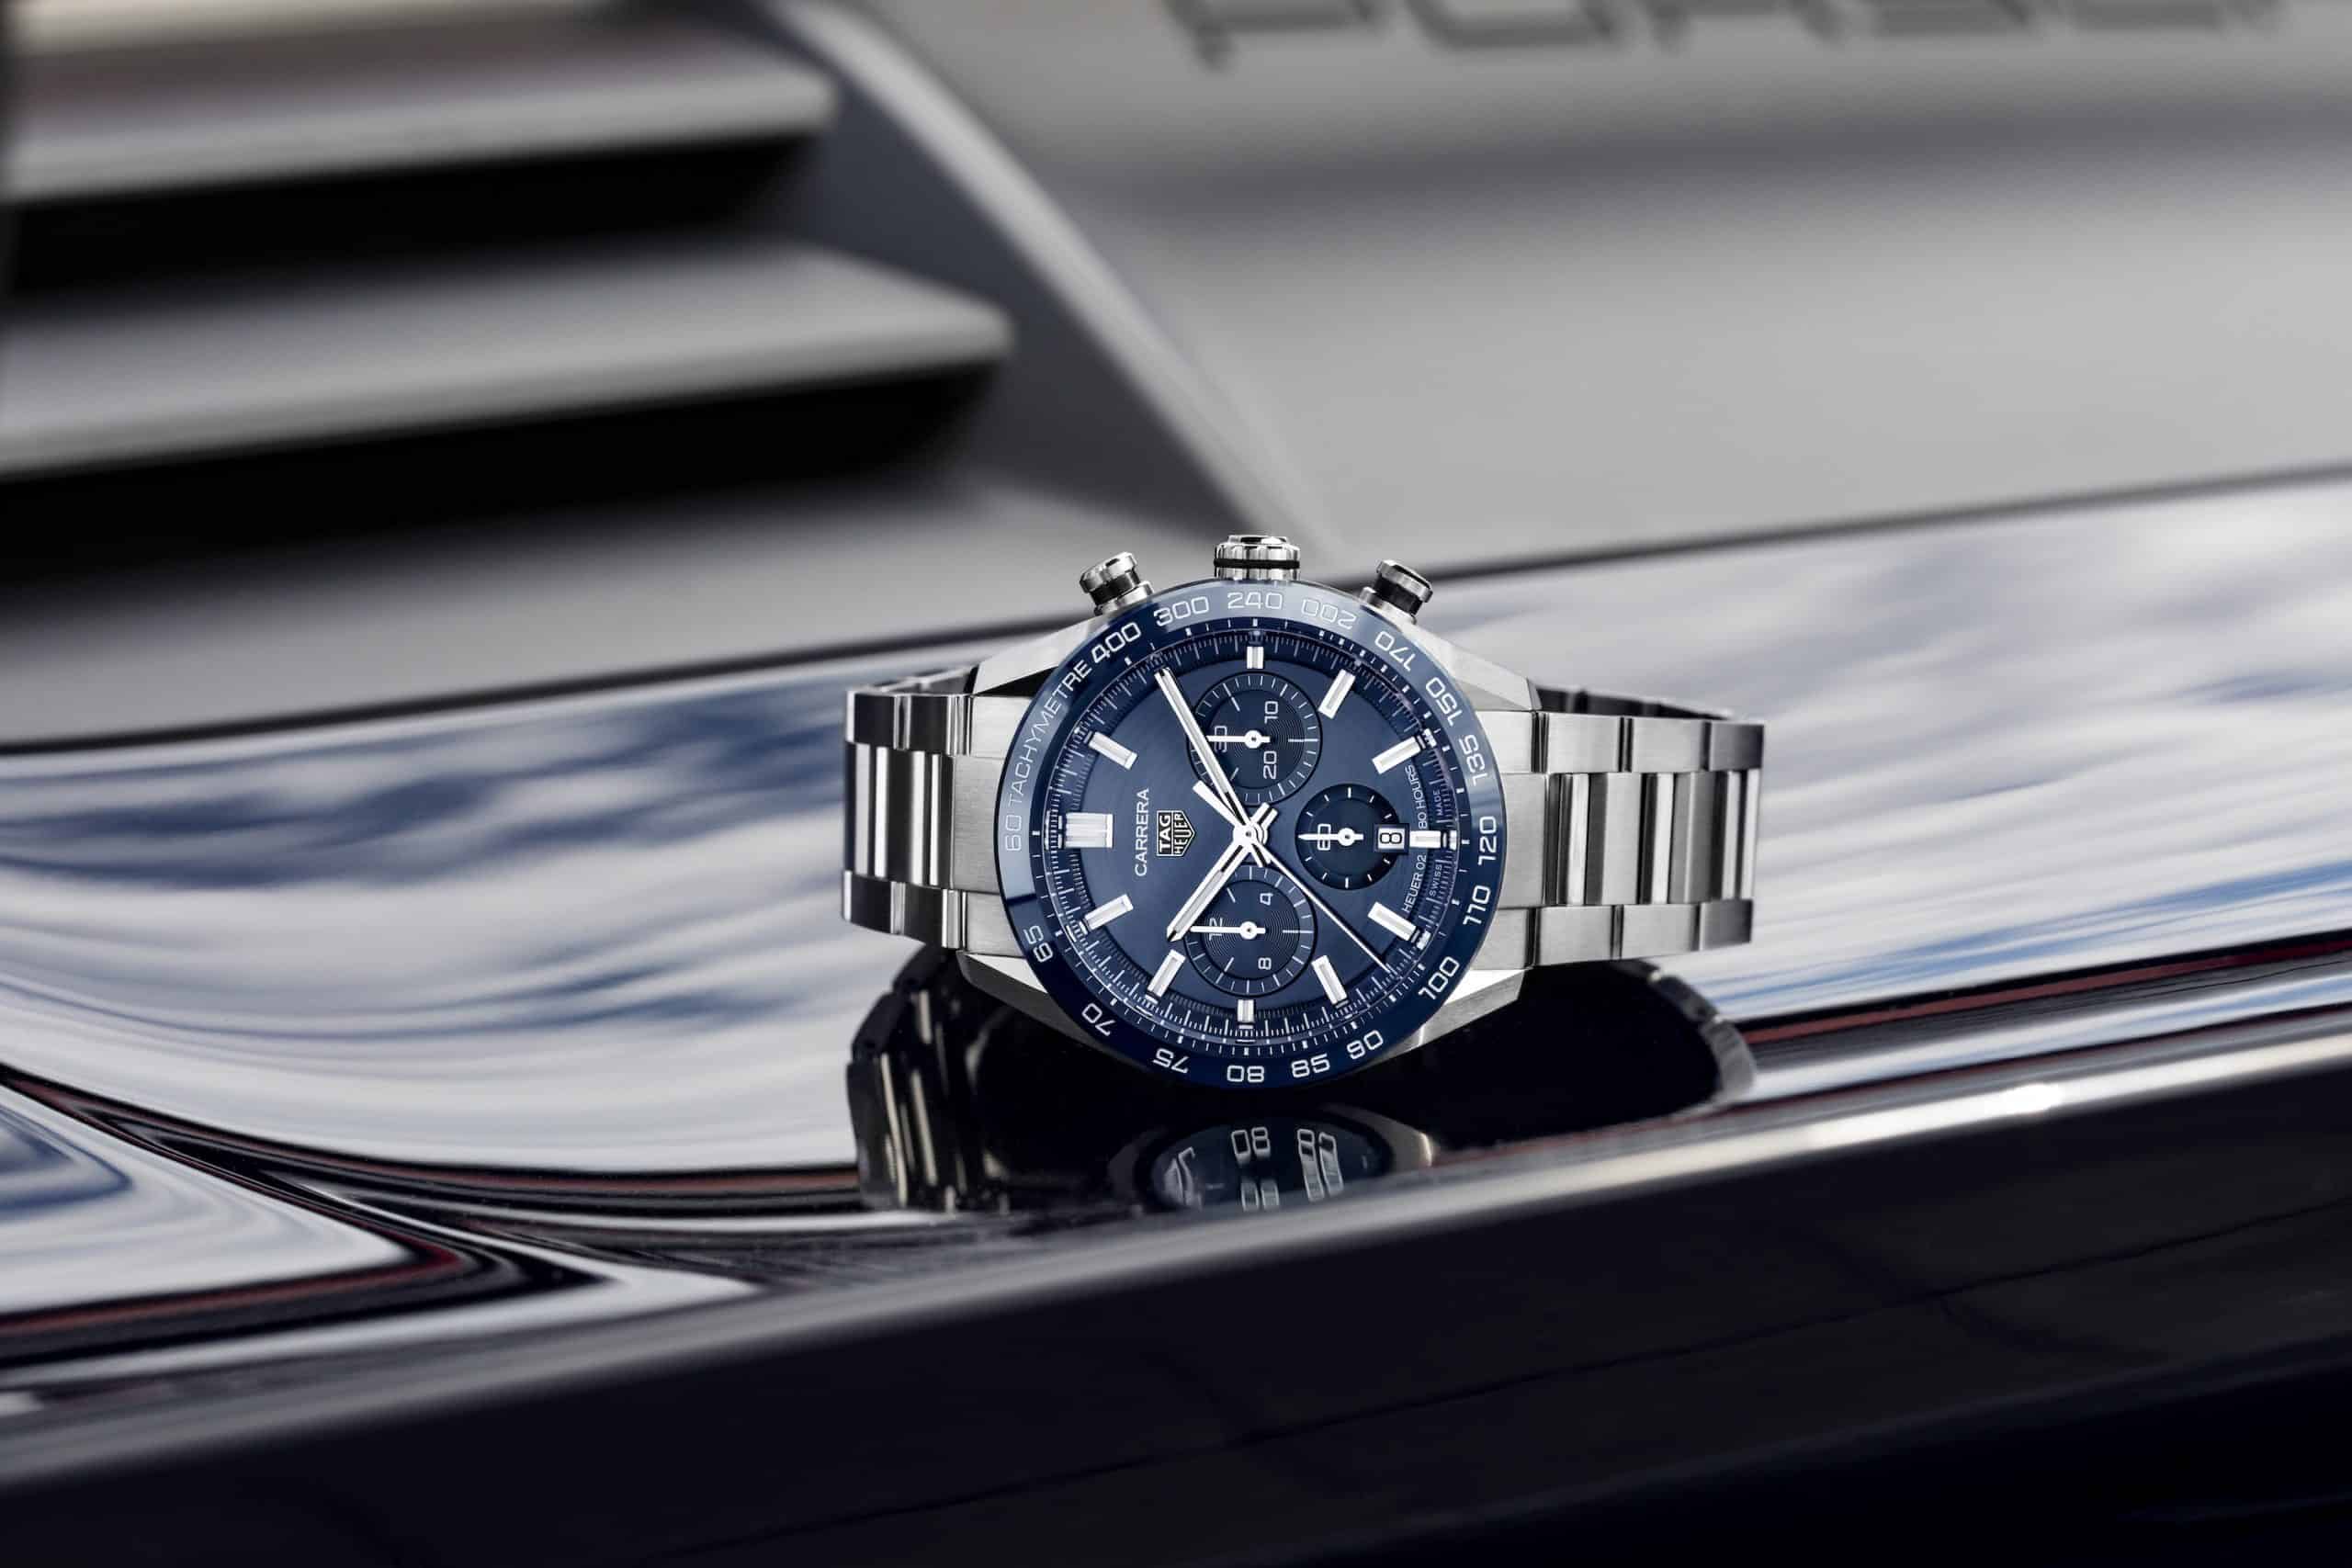 The TAG Heuer Carrera Could Be The Best Father's Day Gift Ever